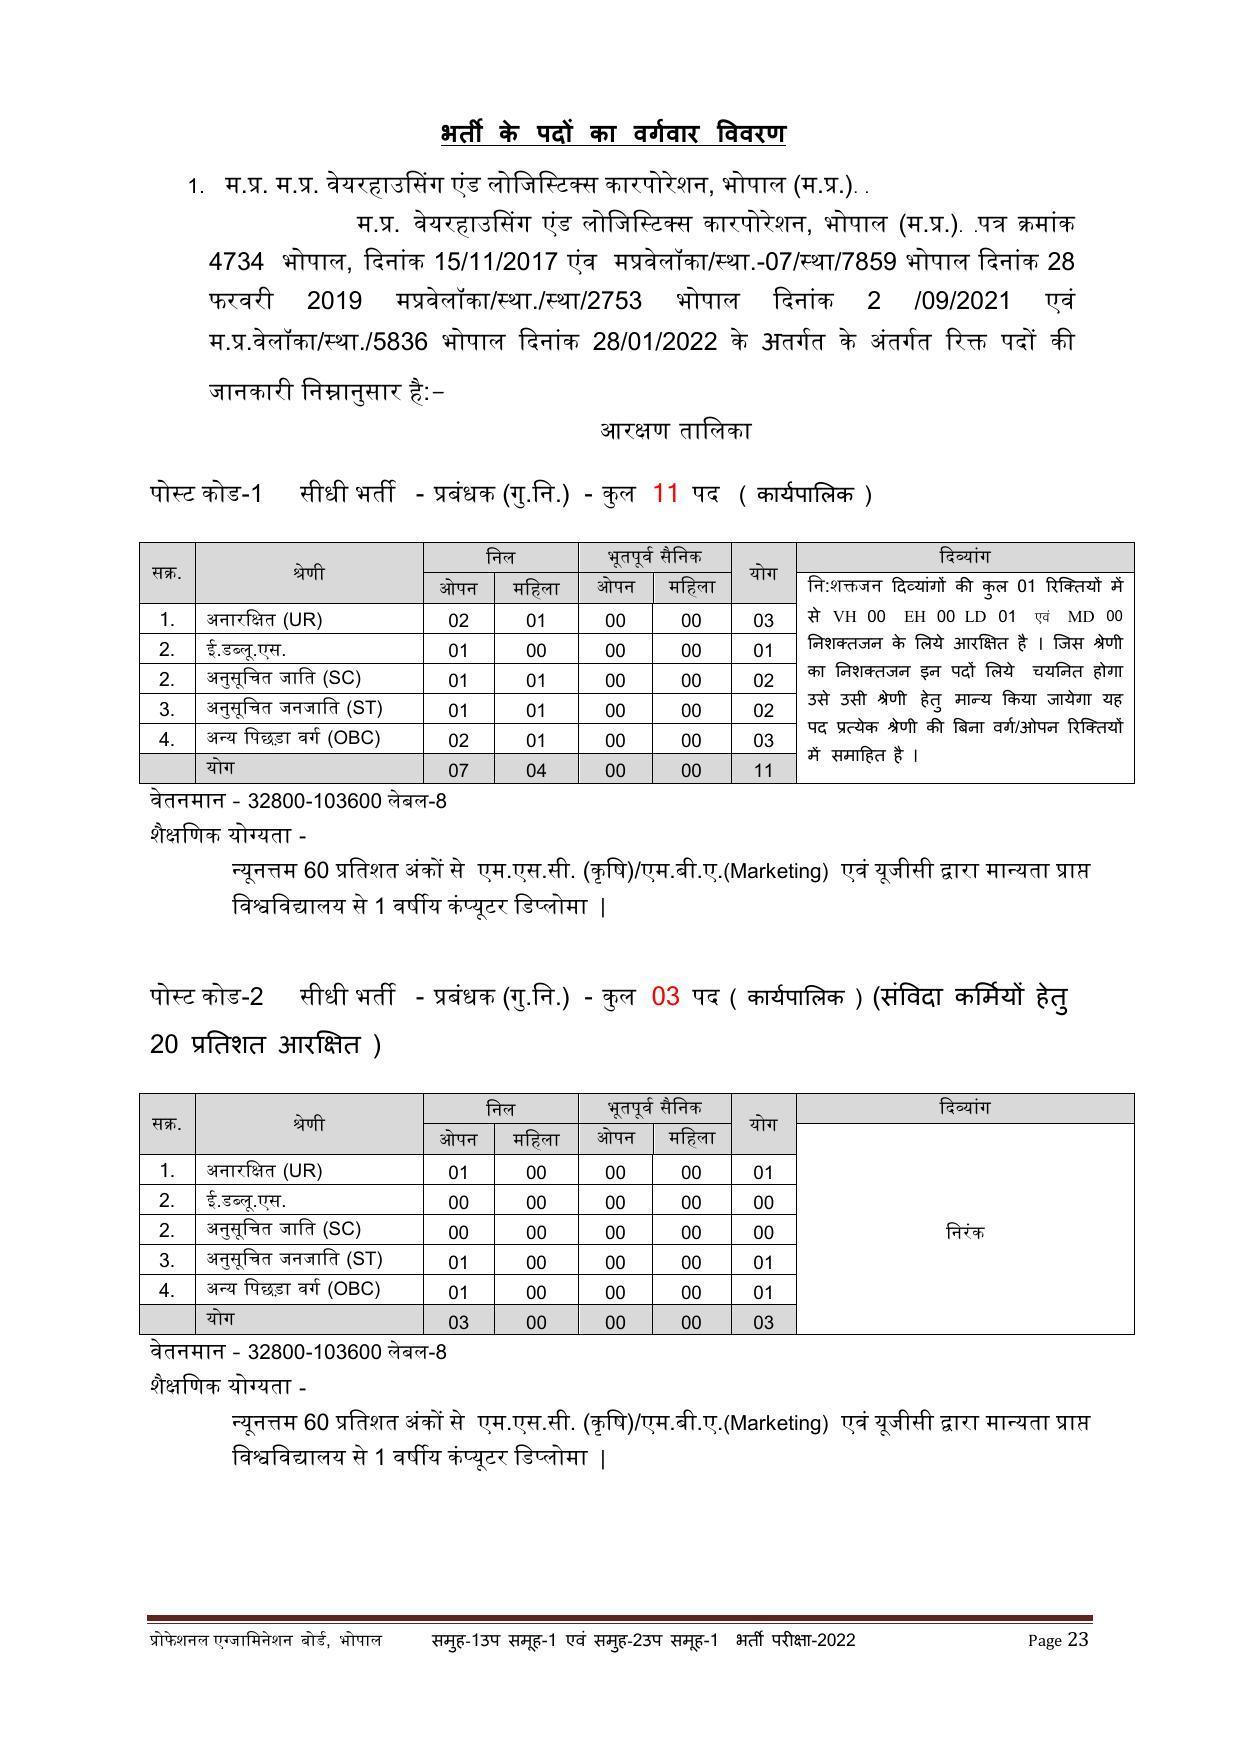 MPPEB Group-I Sub Group-I & Group-II Sub Group-I Recruitment 2022 - Page 27